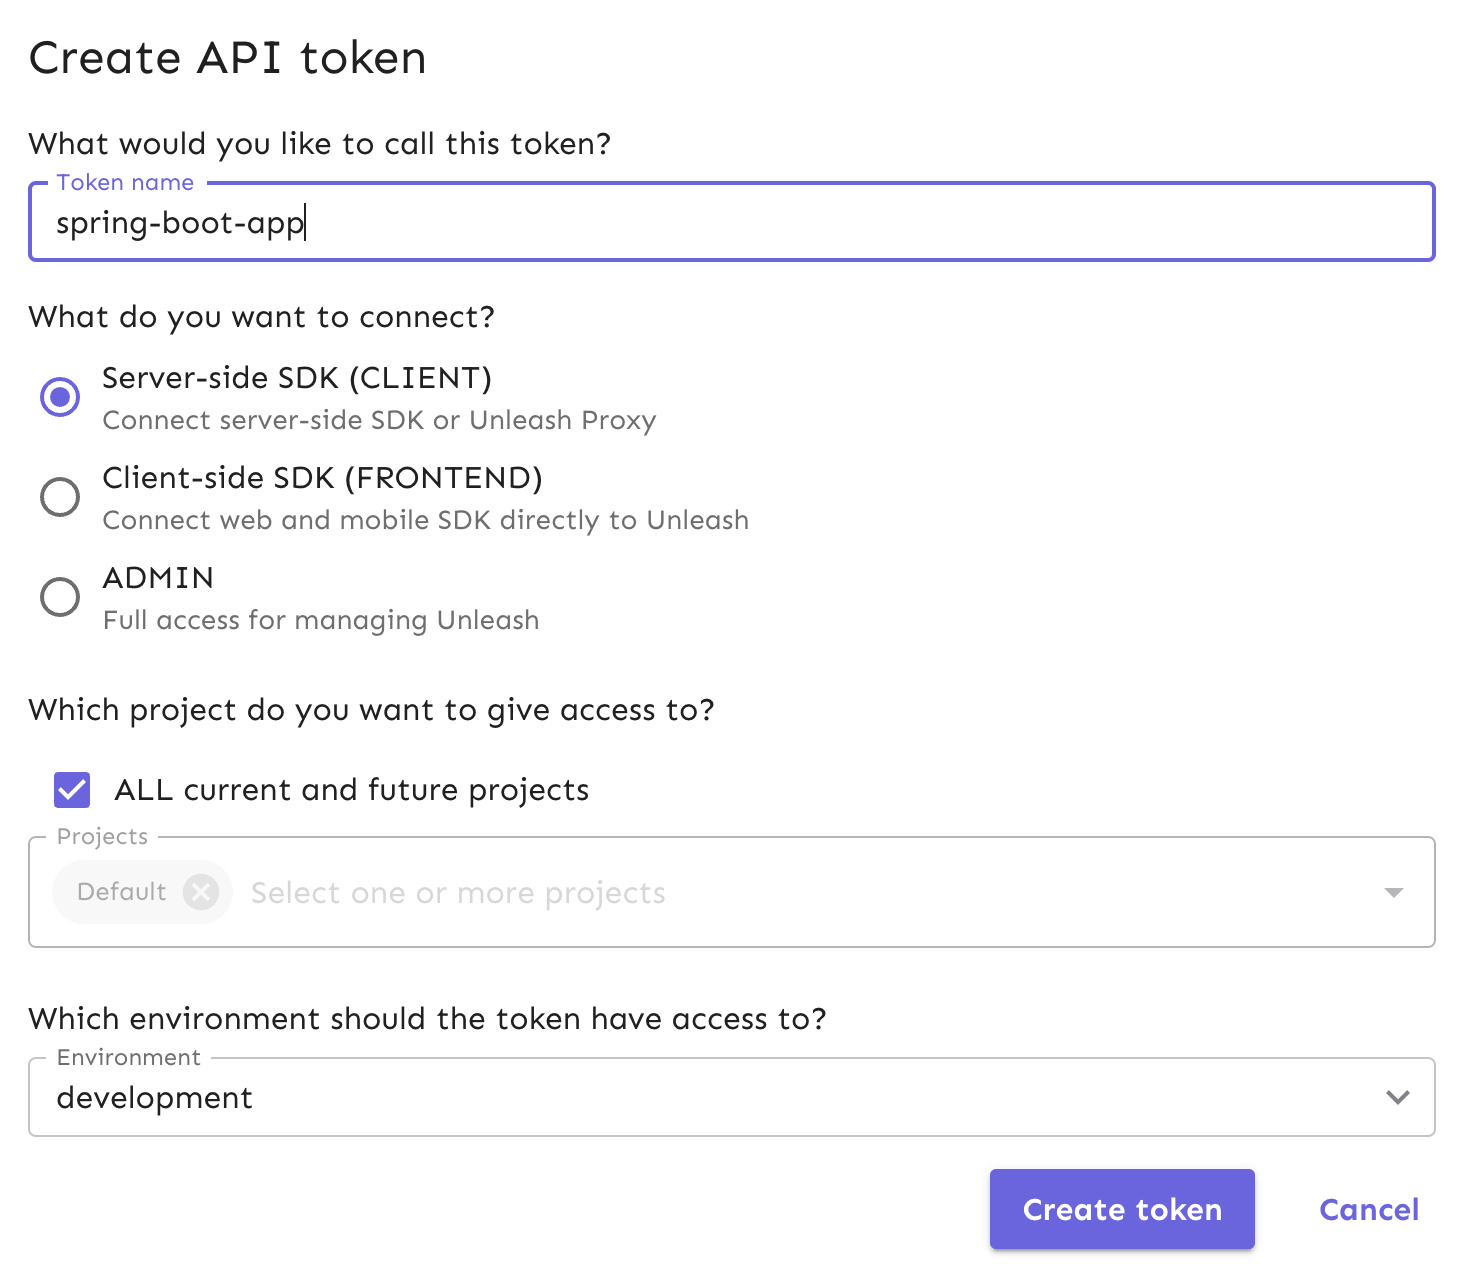 Name your API token and ensure it is a server-side SDK token.